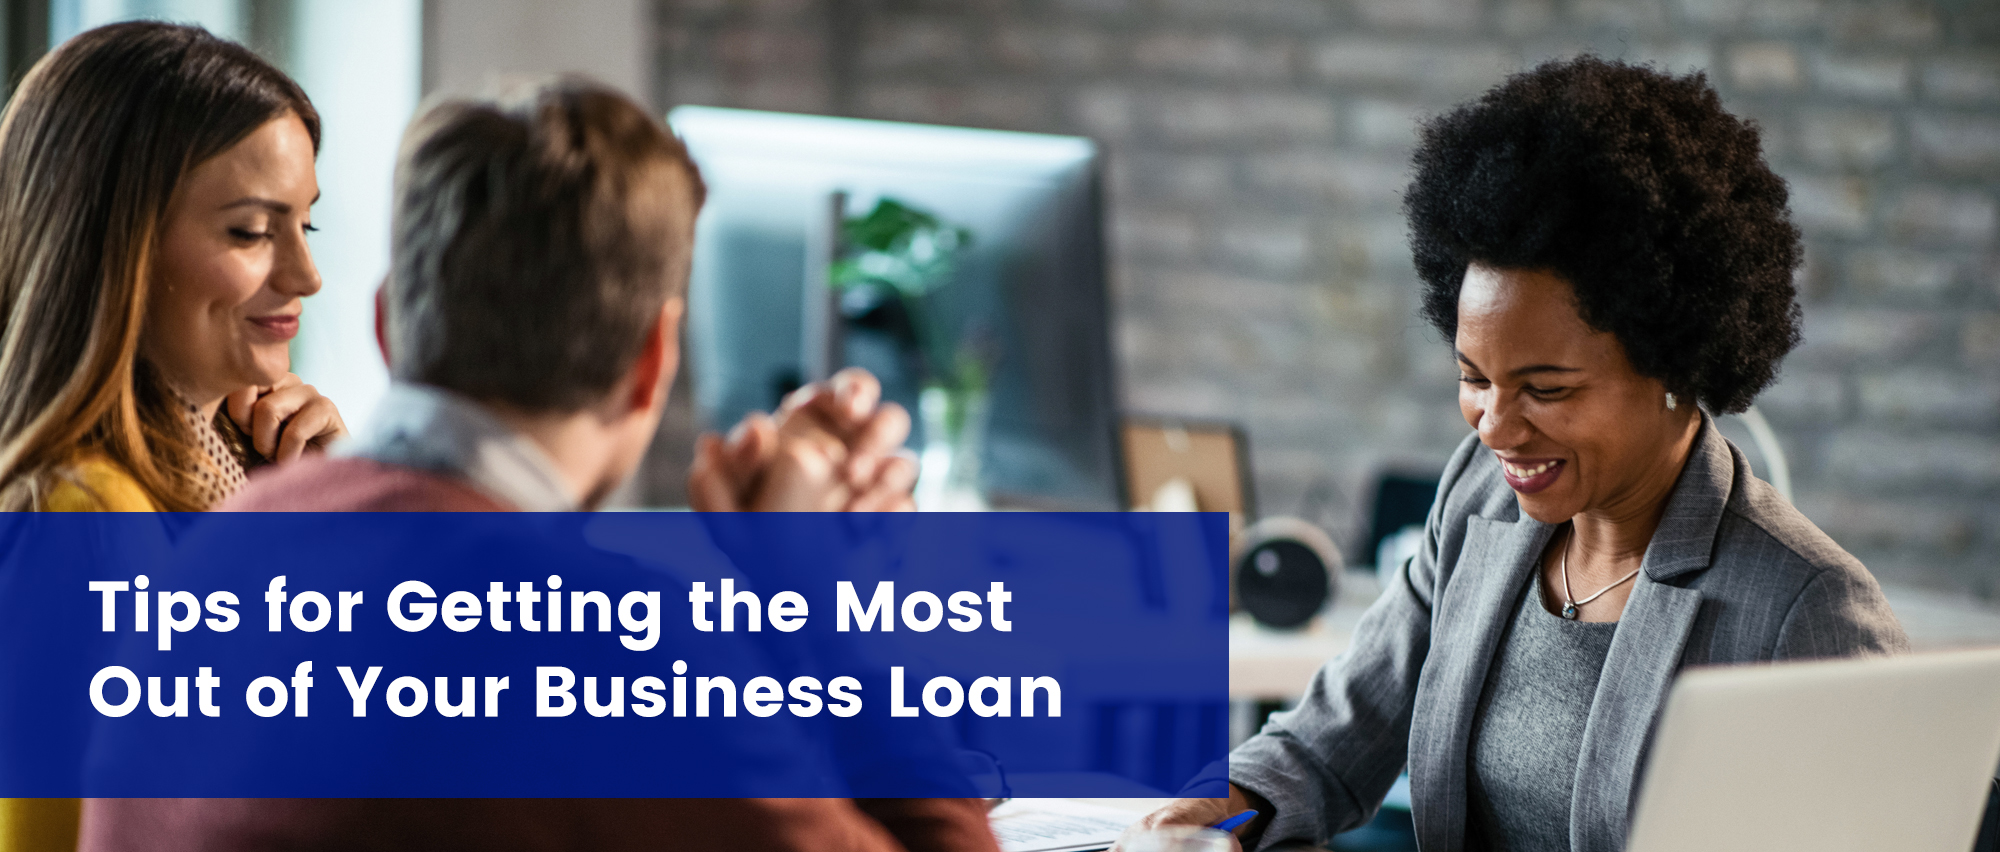 Tips for Getting the Most Out of Your Business Loan